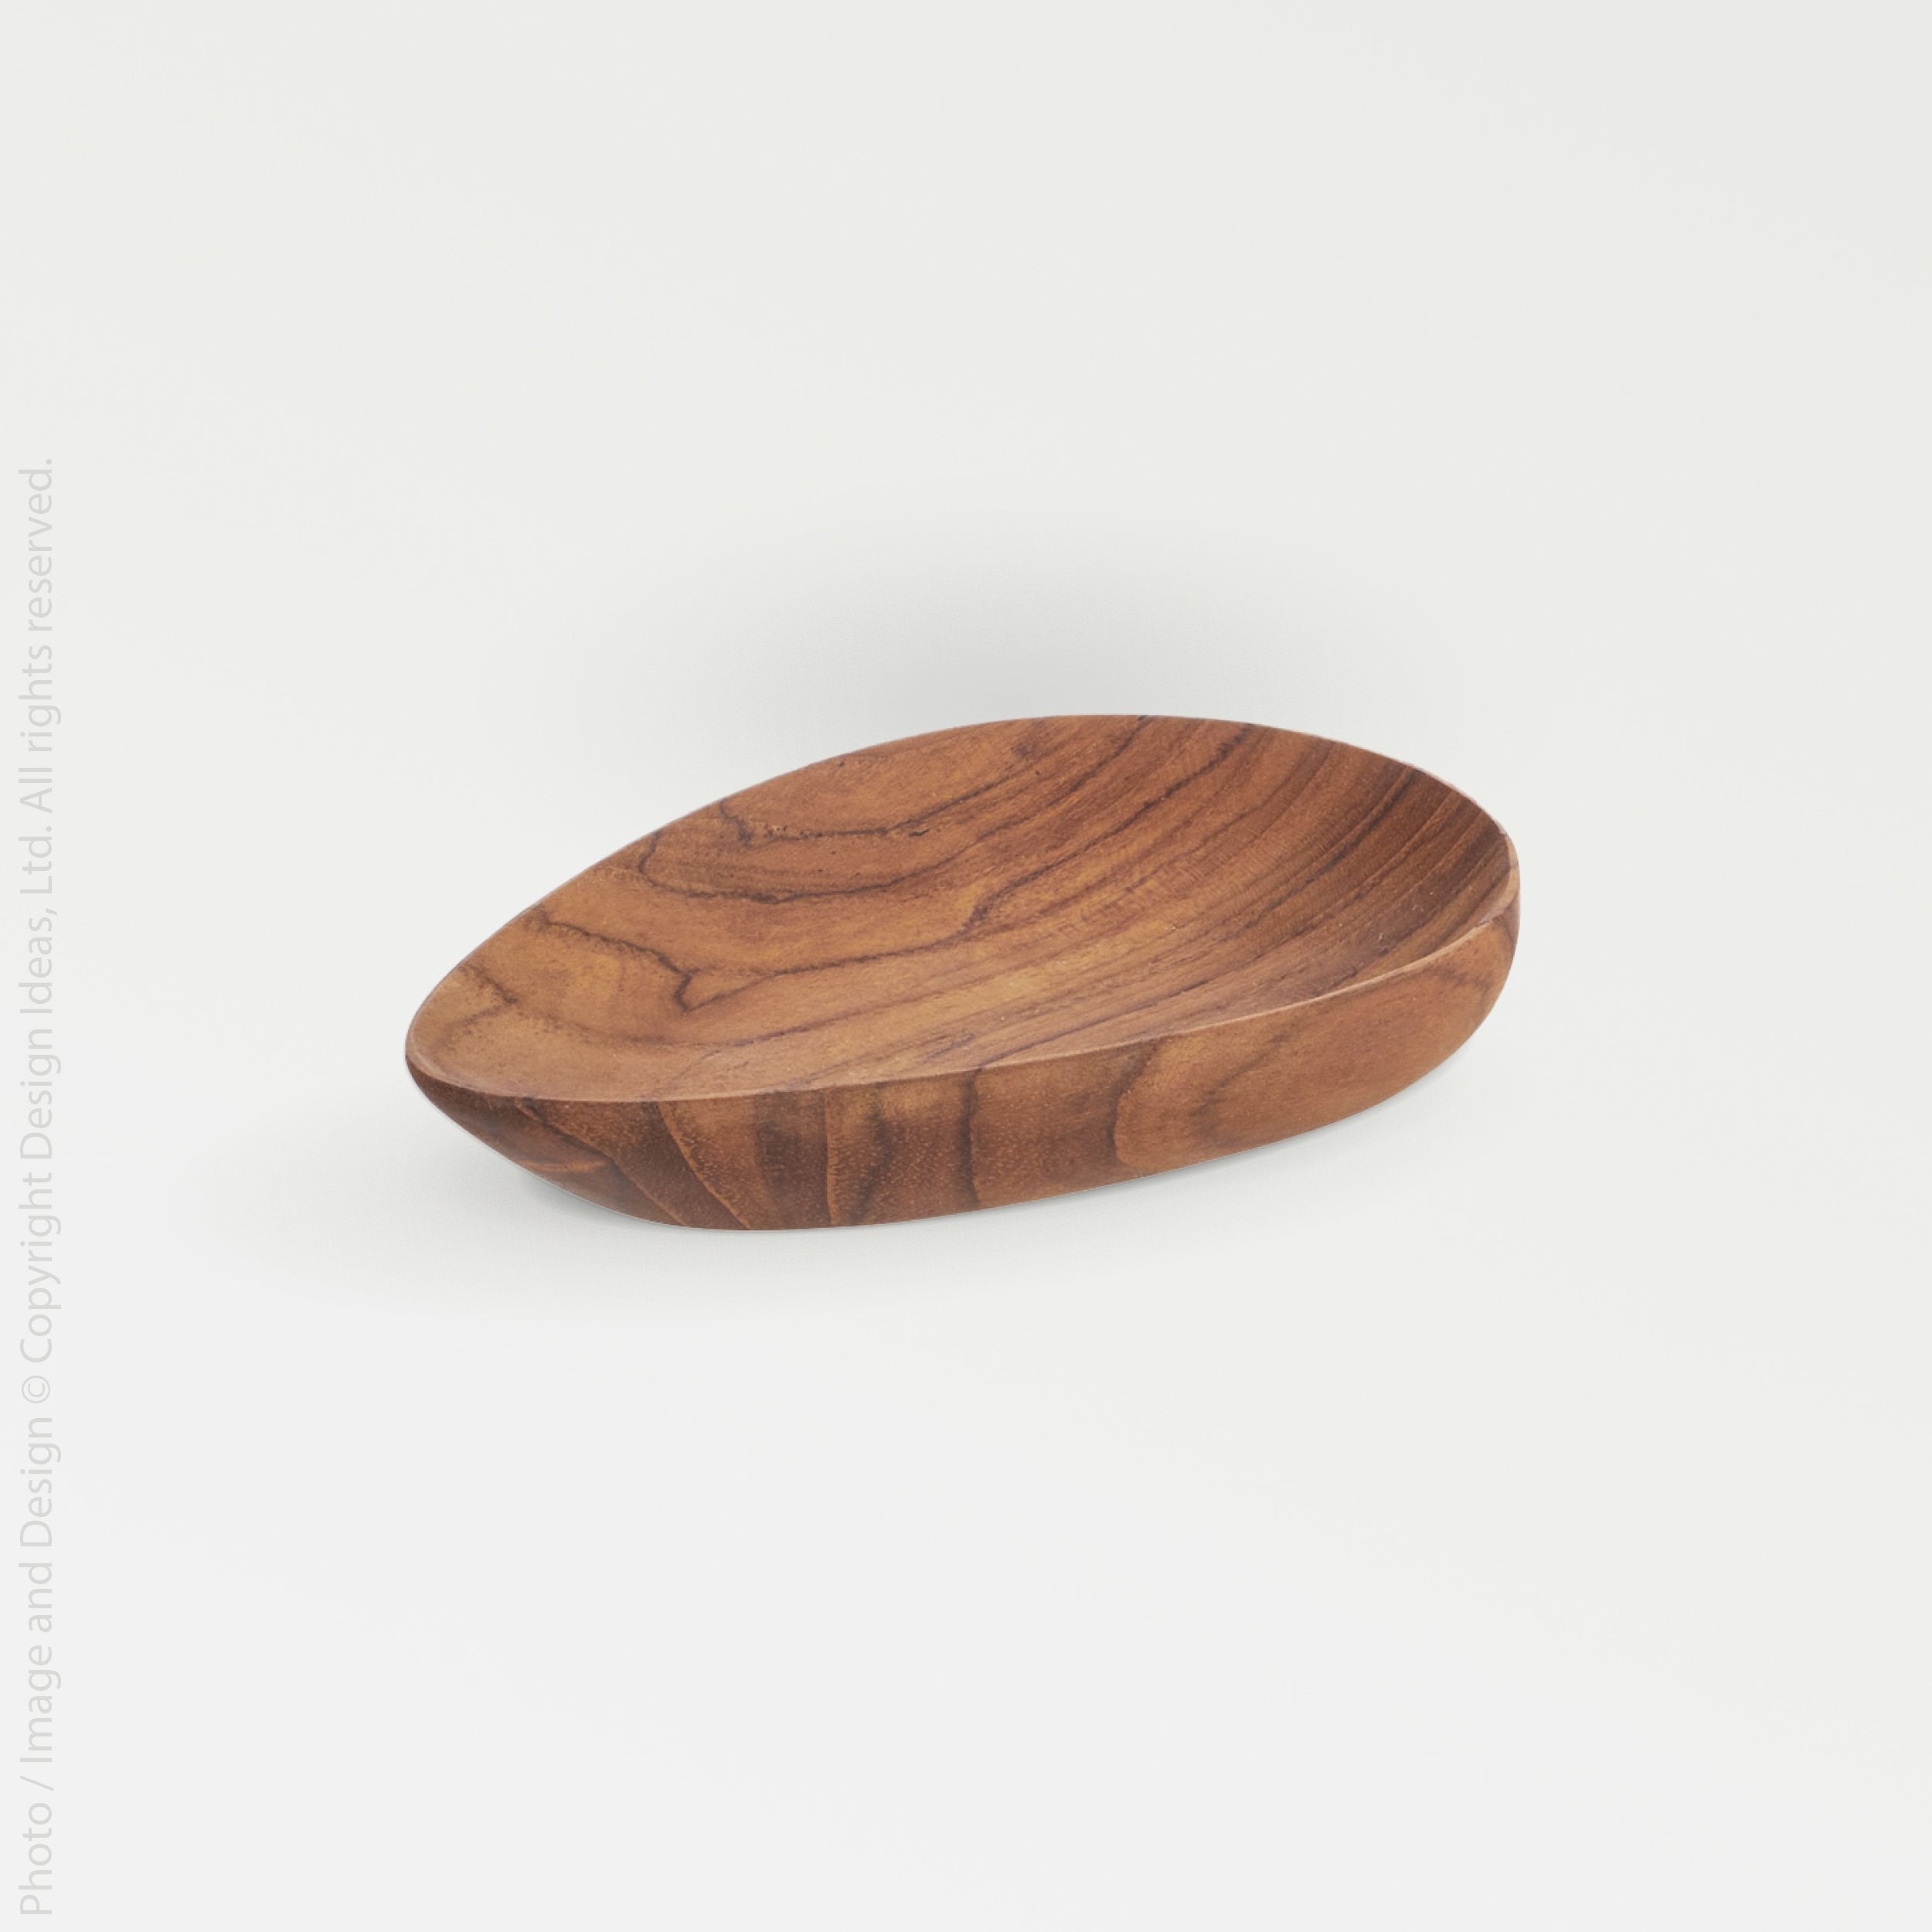 Chiku Teak Teardrop Bowl - Black Color | Image 1 | From the Chiku Collection | Exquisitely crafted with natural teak for long lasting use | This bowl is sustainably sourced | Available in natural color | texxture home